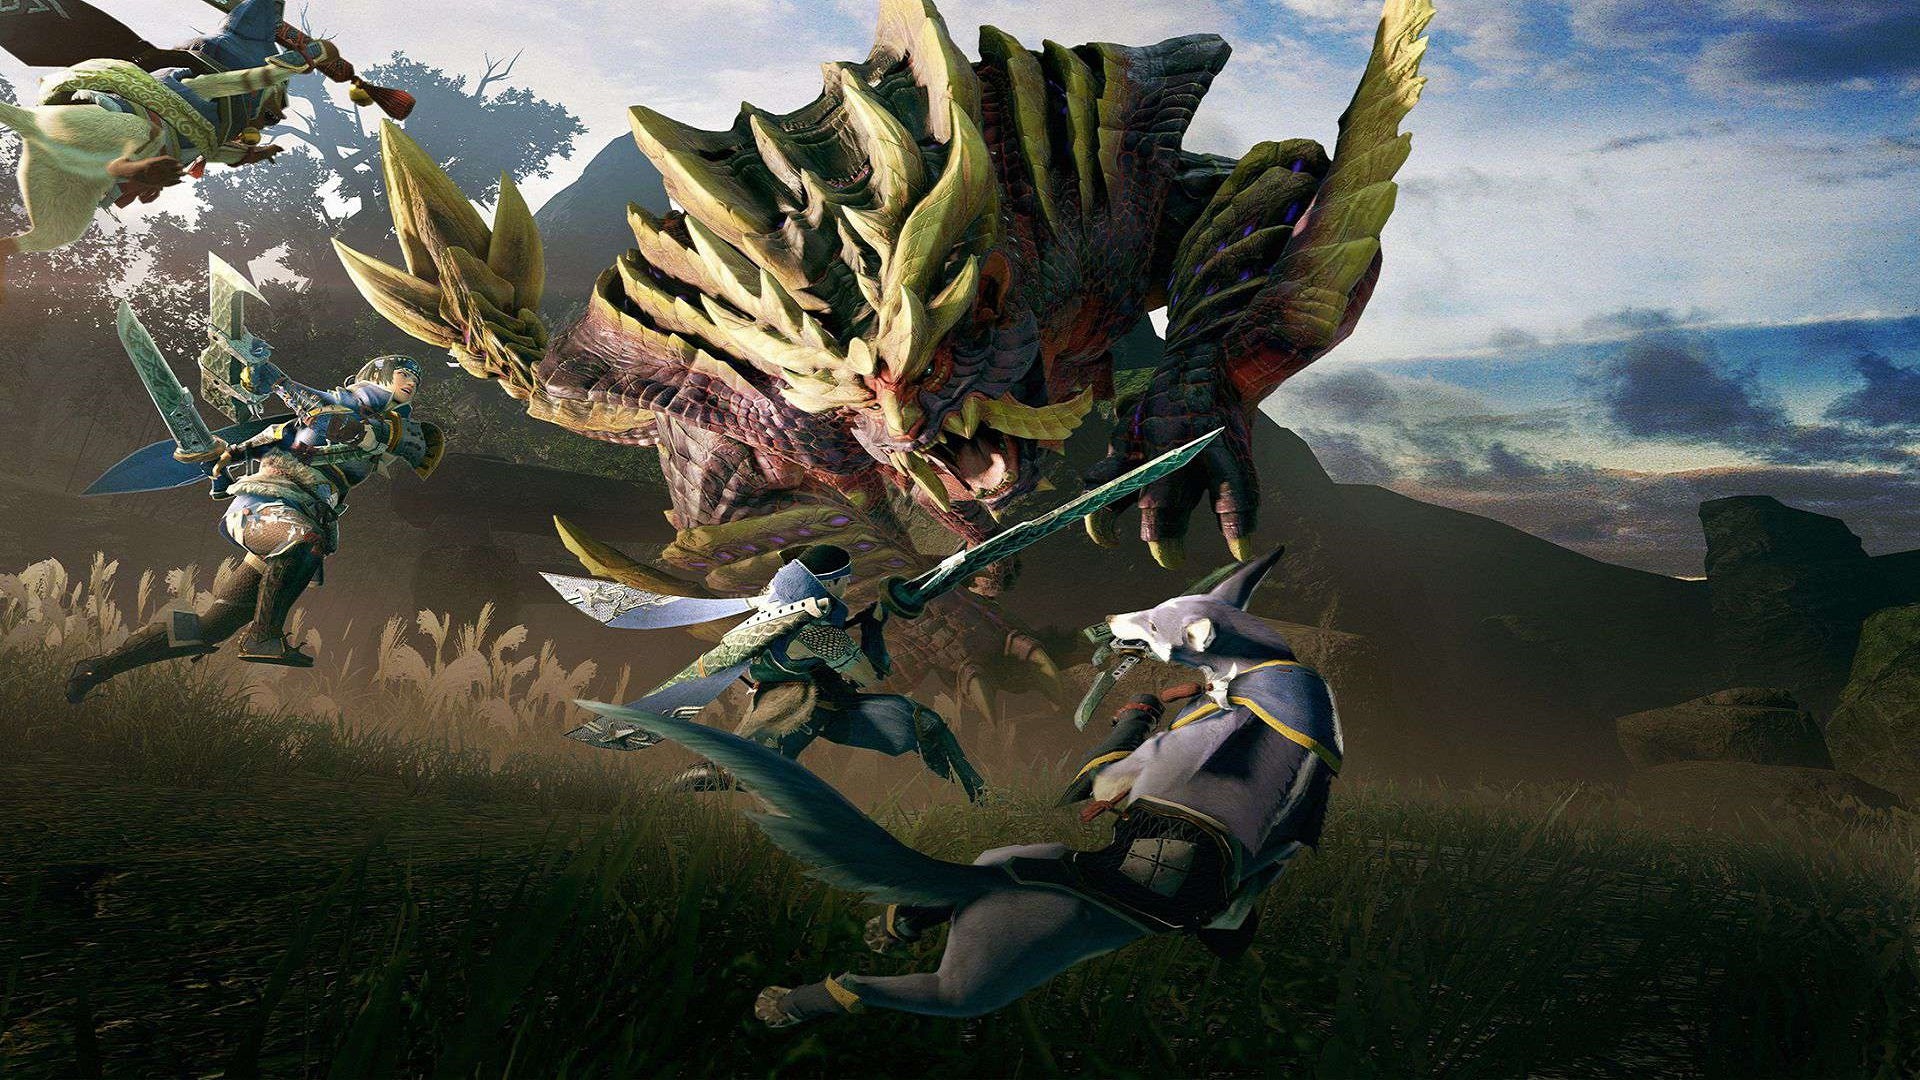 The main loading screen image from Monster Hunter Rise, showing a party of two human hunters, a Palico, and a Palamute battling against a huge lizard-like monster.